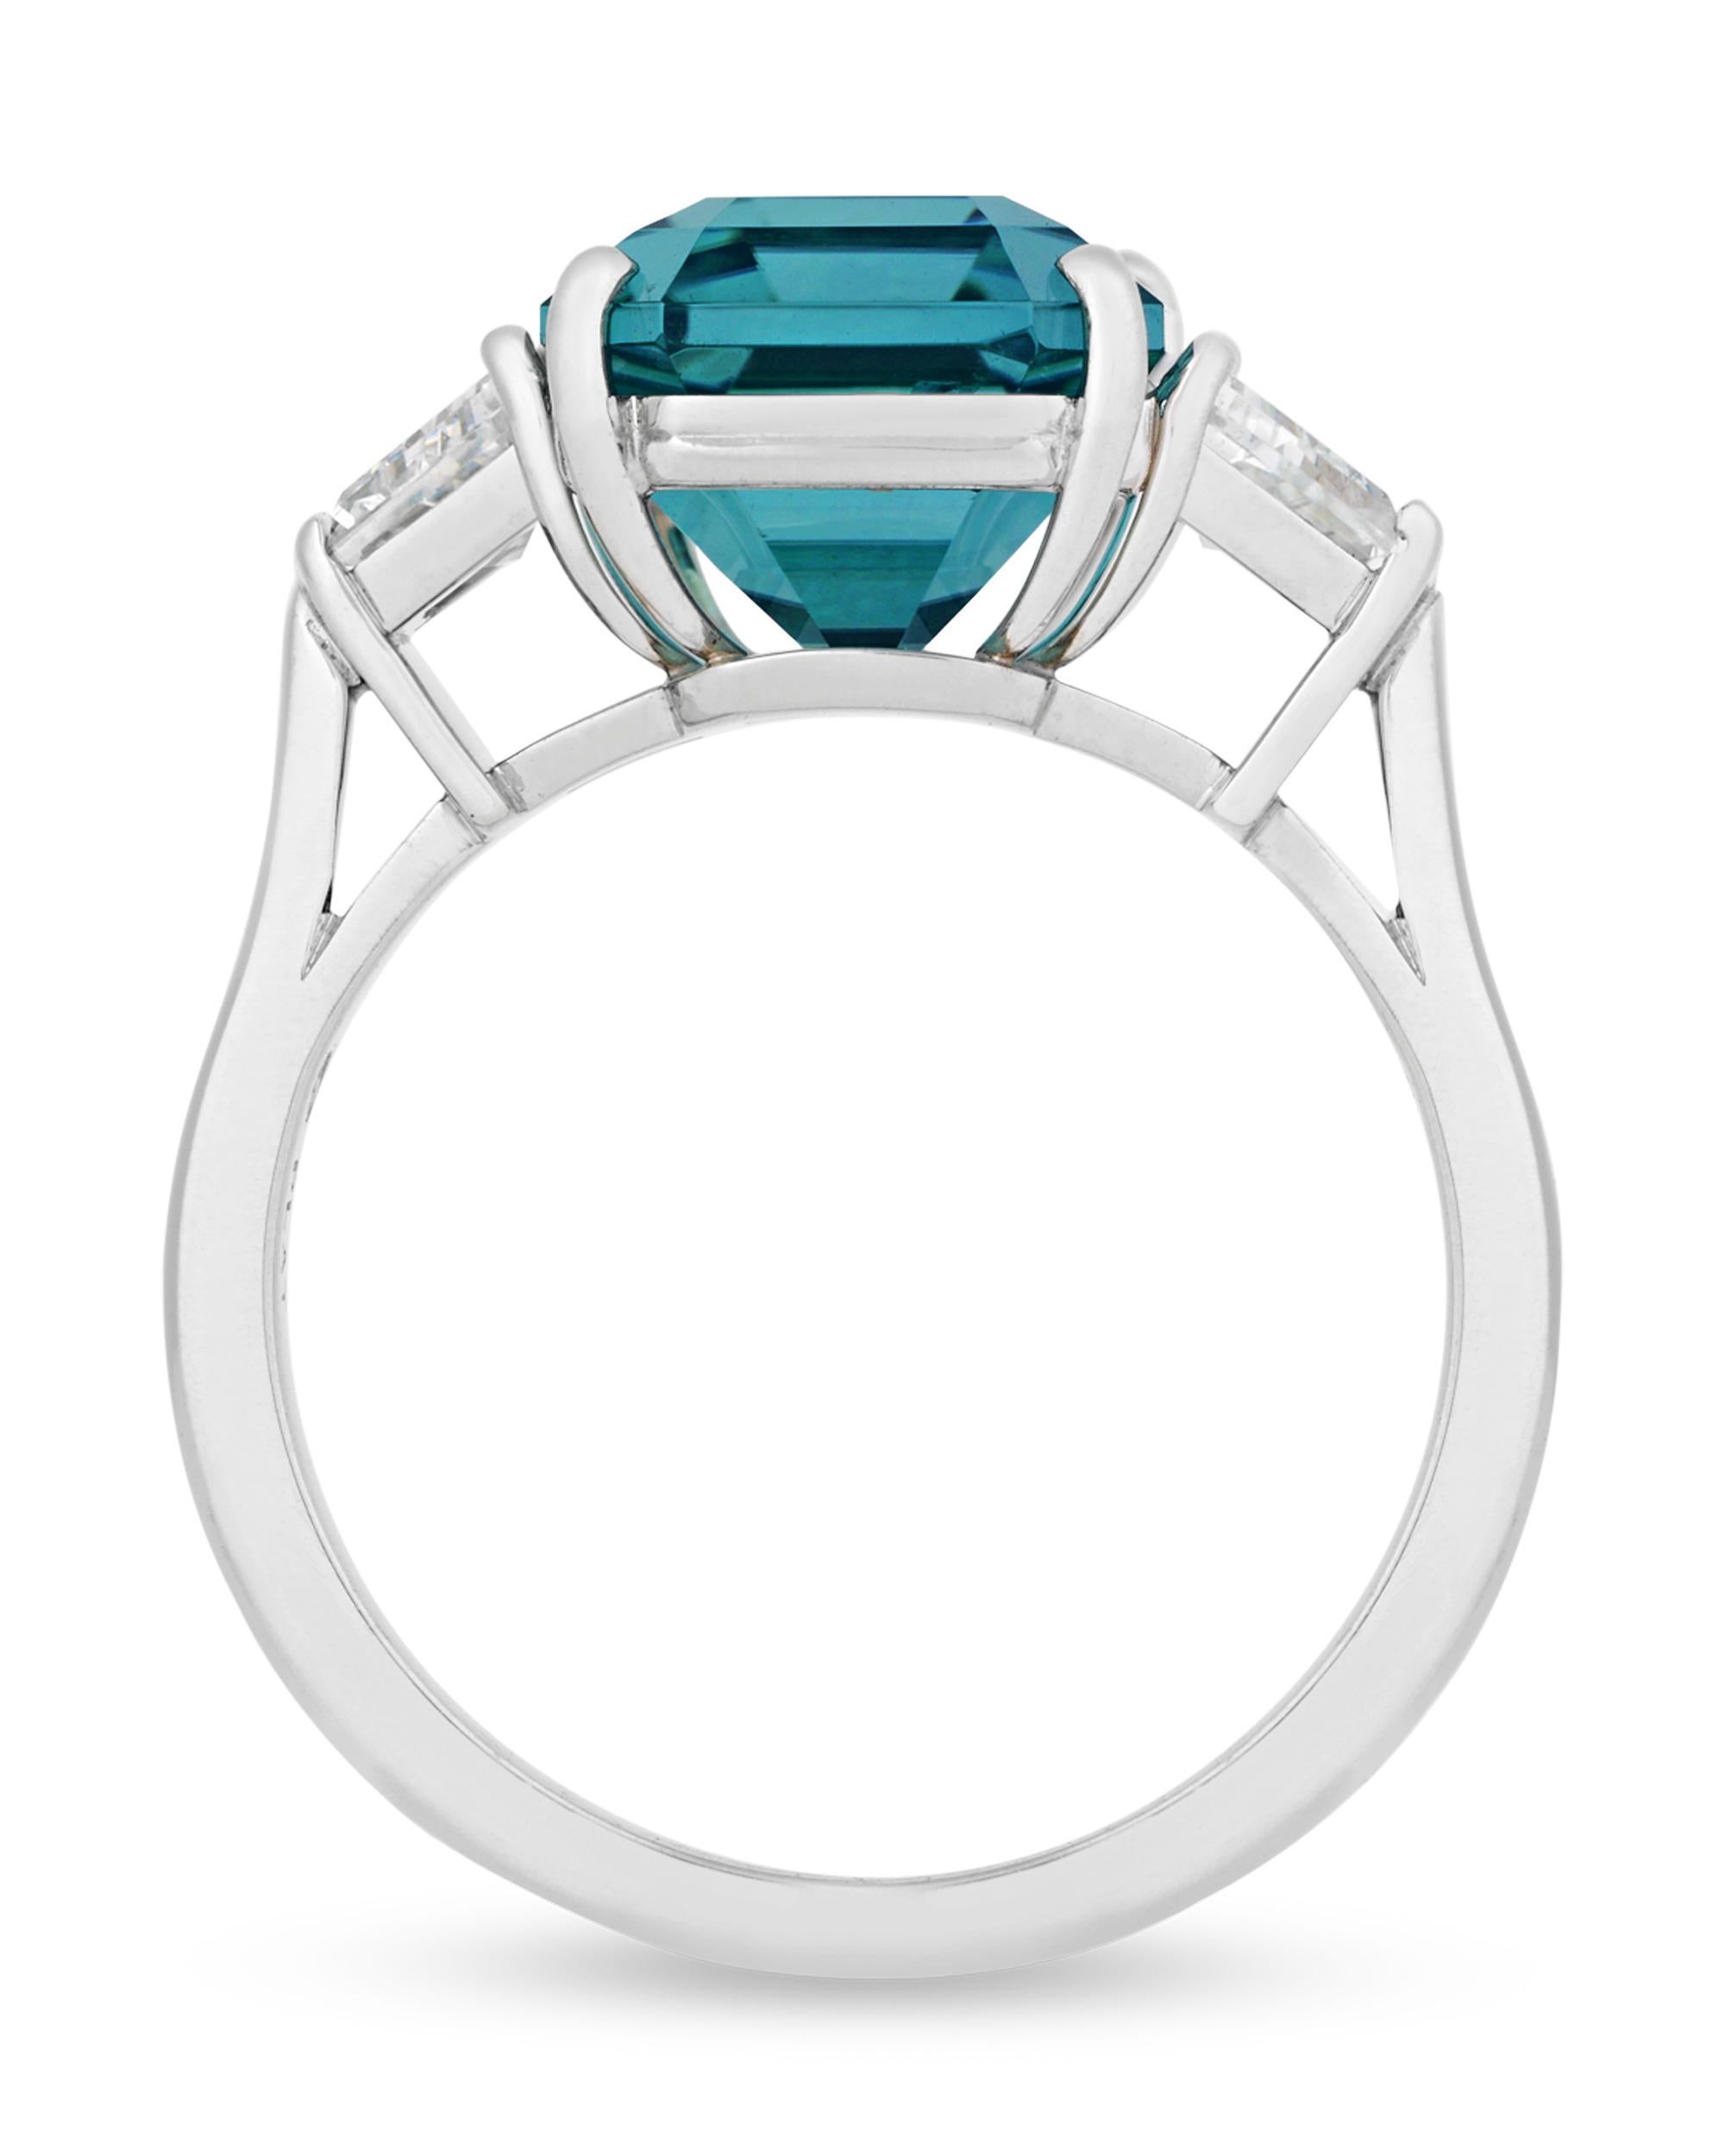 The emerald-cut lagoon tourmaline centering this elegant ring from American jeweler Oscar Heyman showcases a remarkable greenish-blue hue. Weighing 5.45 carats, the gemstone is certified by C. Dunaigre as bearing an excellent quality grade. Flanked